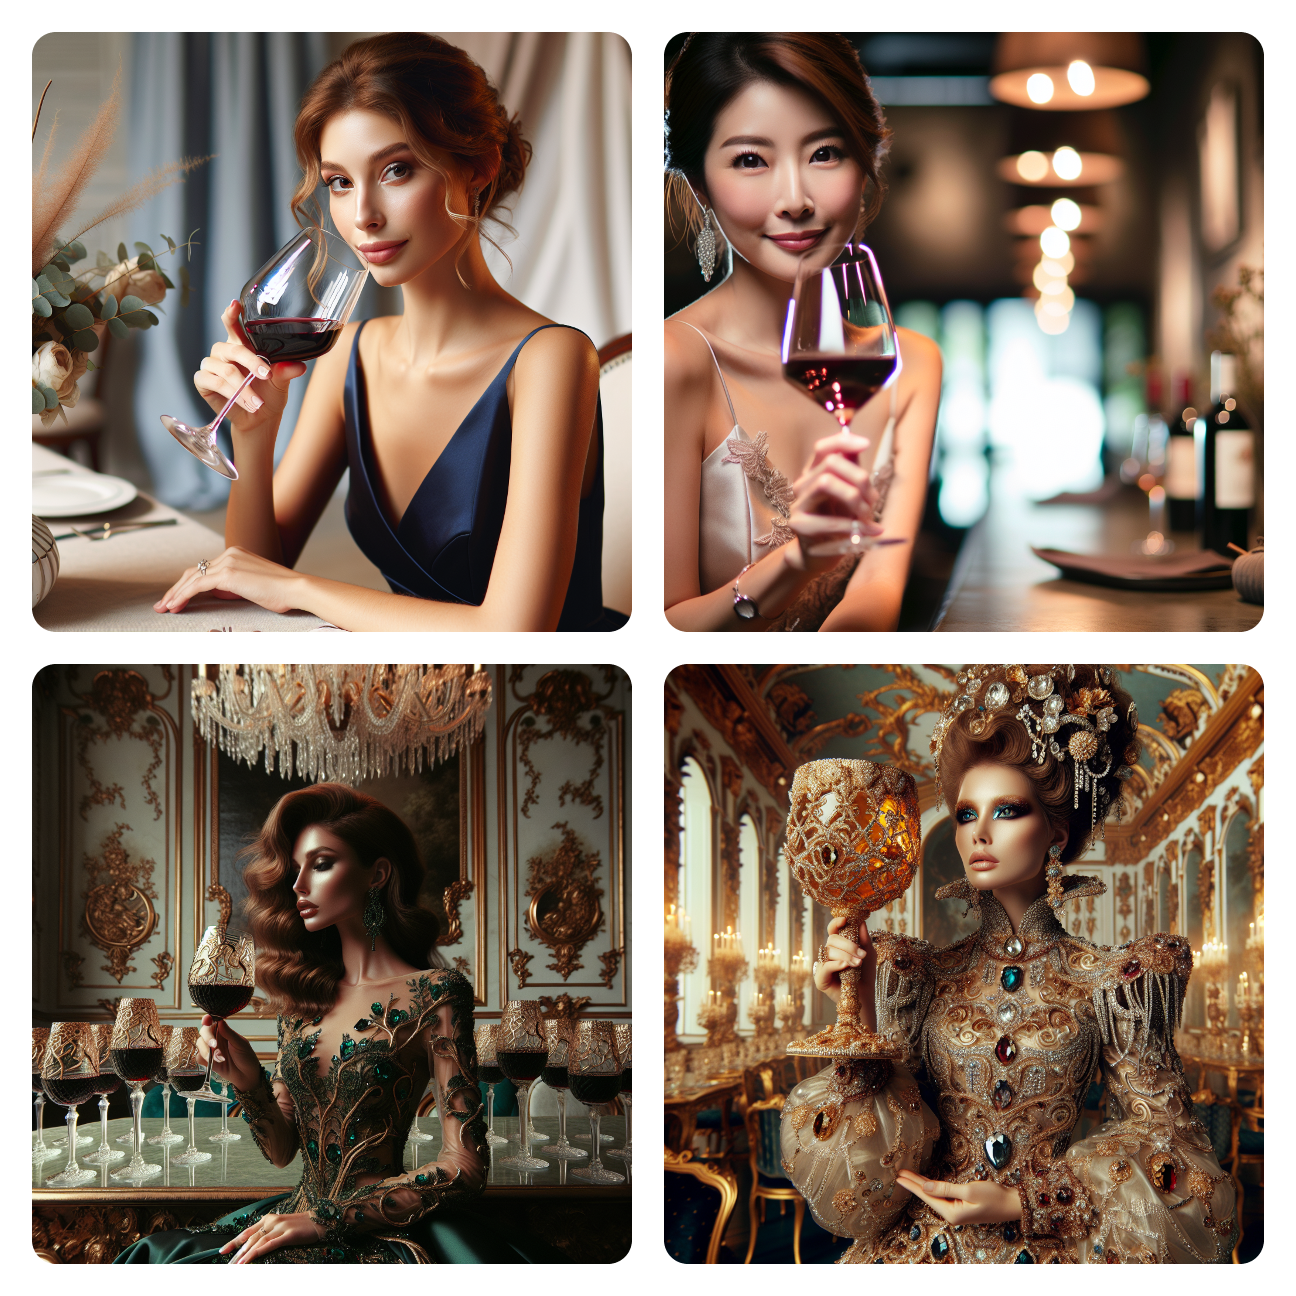 Image: Grapes of Lux: The Vino Vogue Escalation